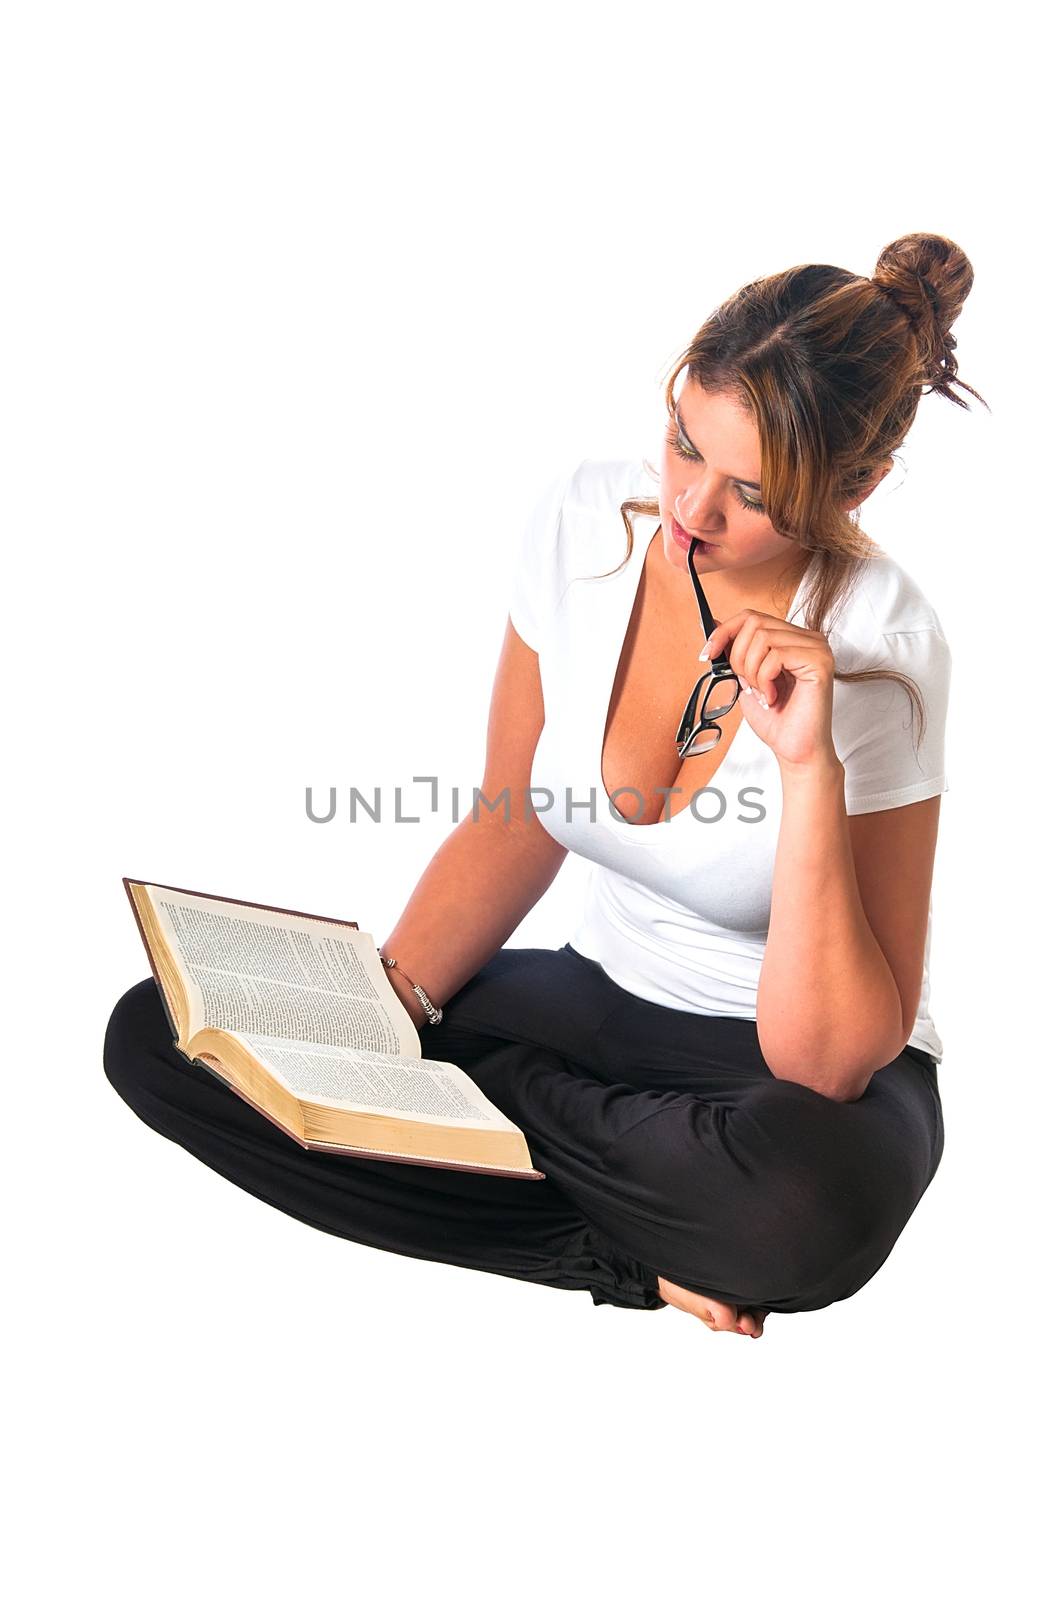 Pretty Young Woman Reading by rcarner